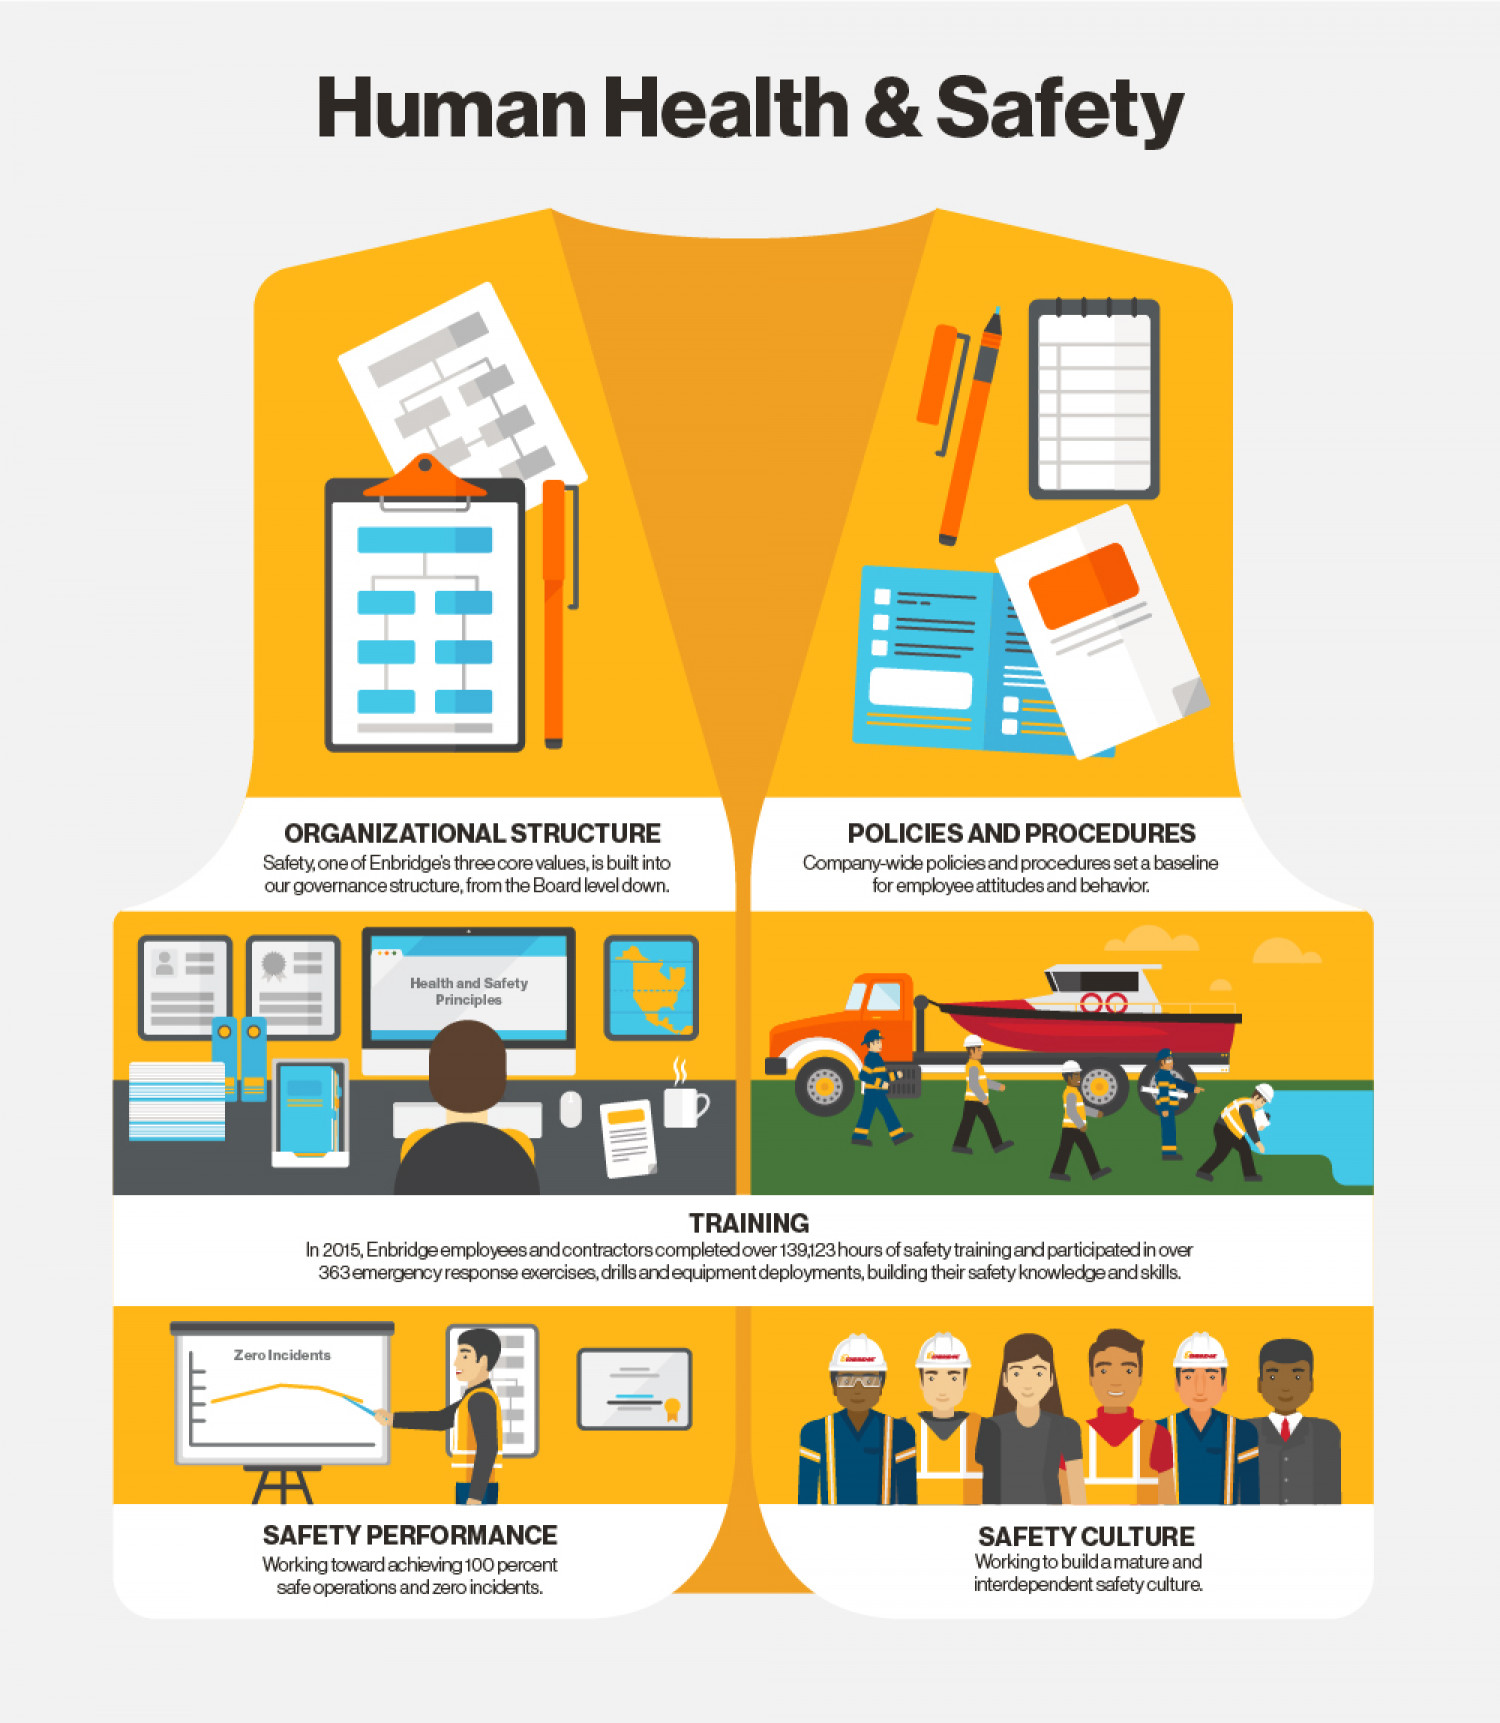 Human Health & Safety Infographic